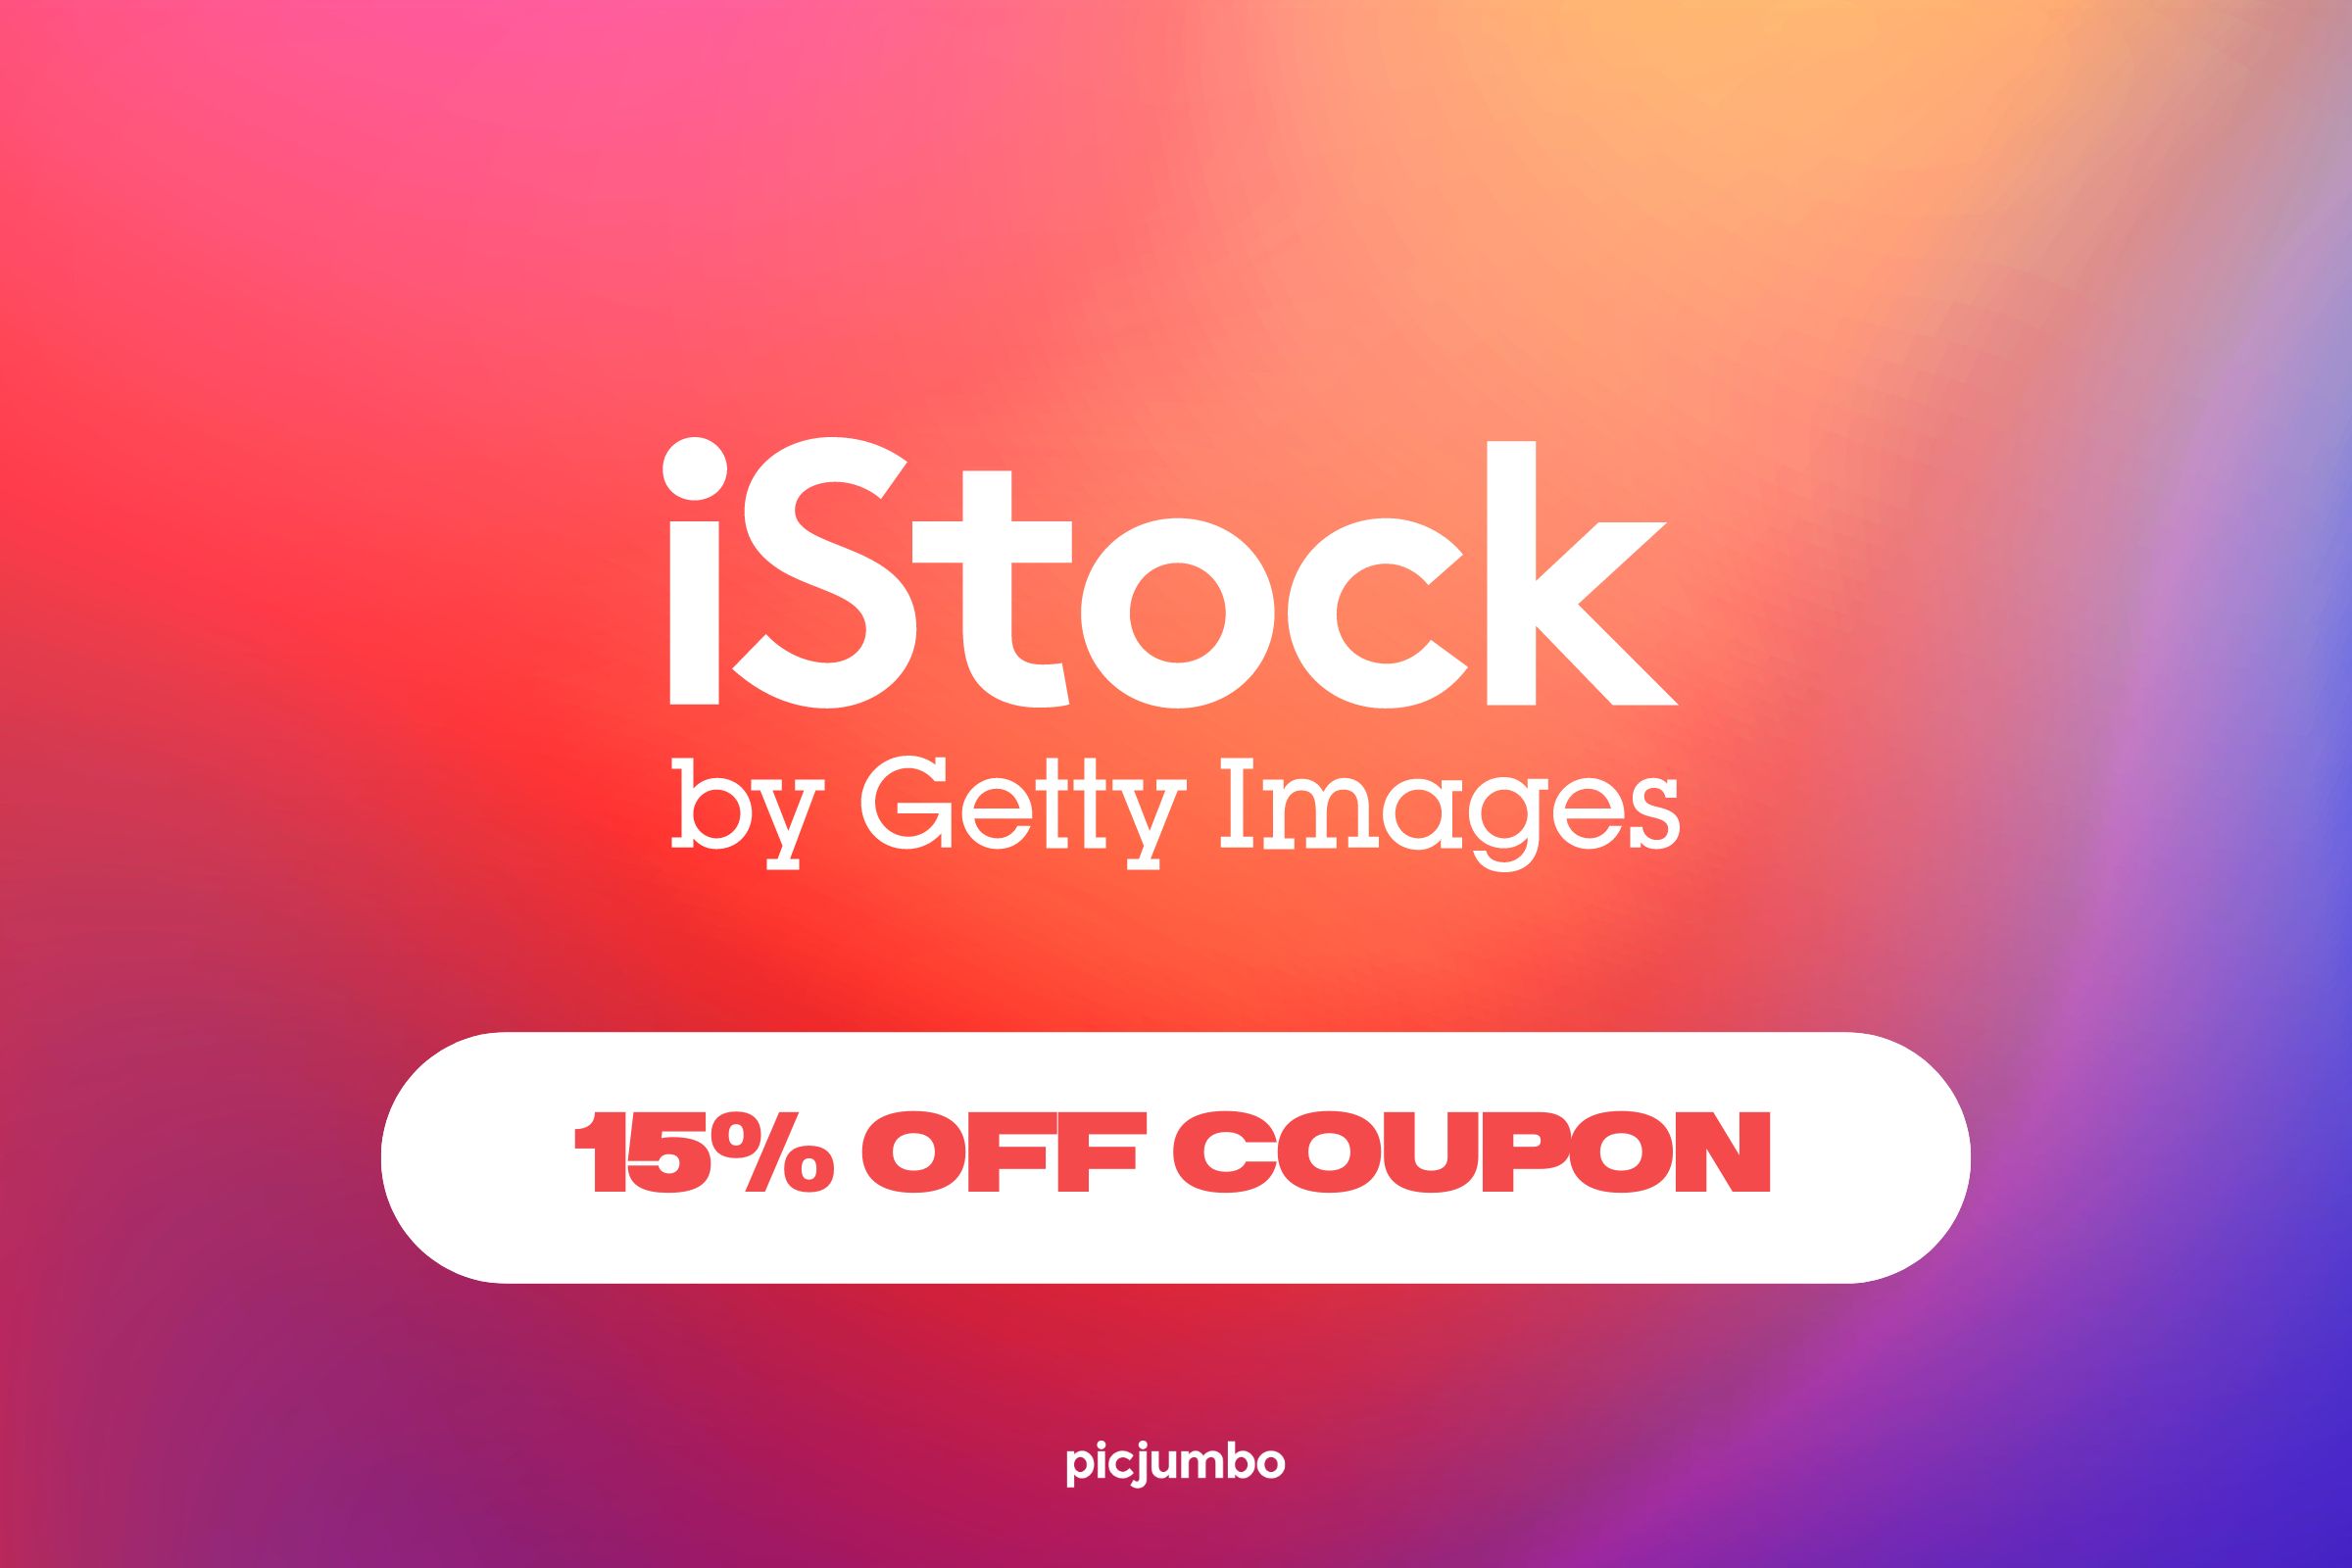 iStock Coupon code for 15% off everything